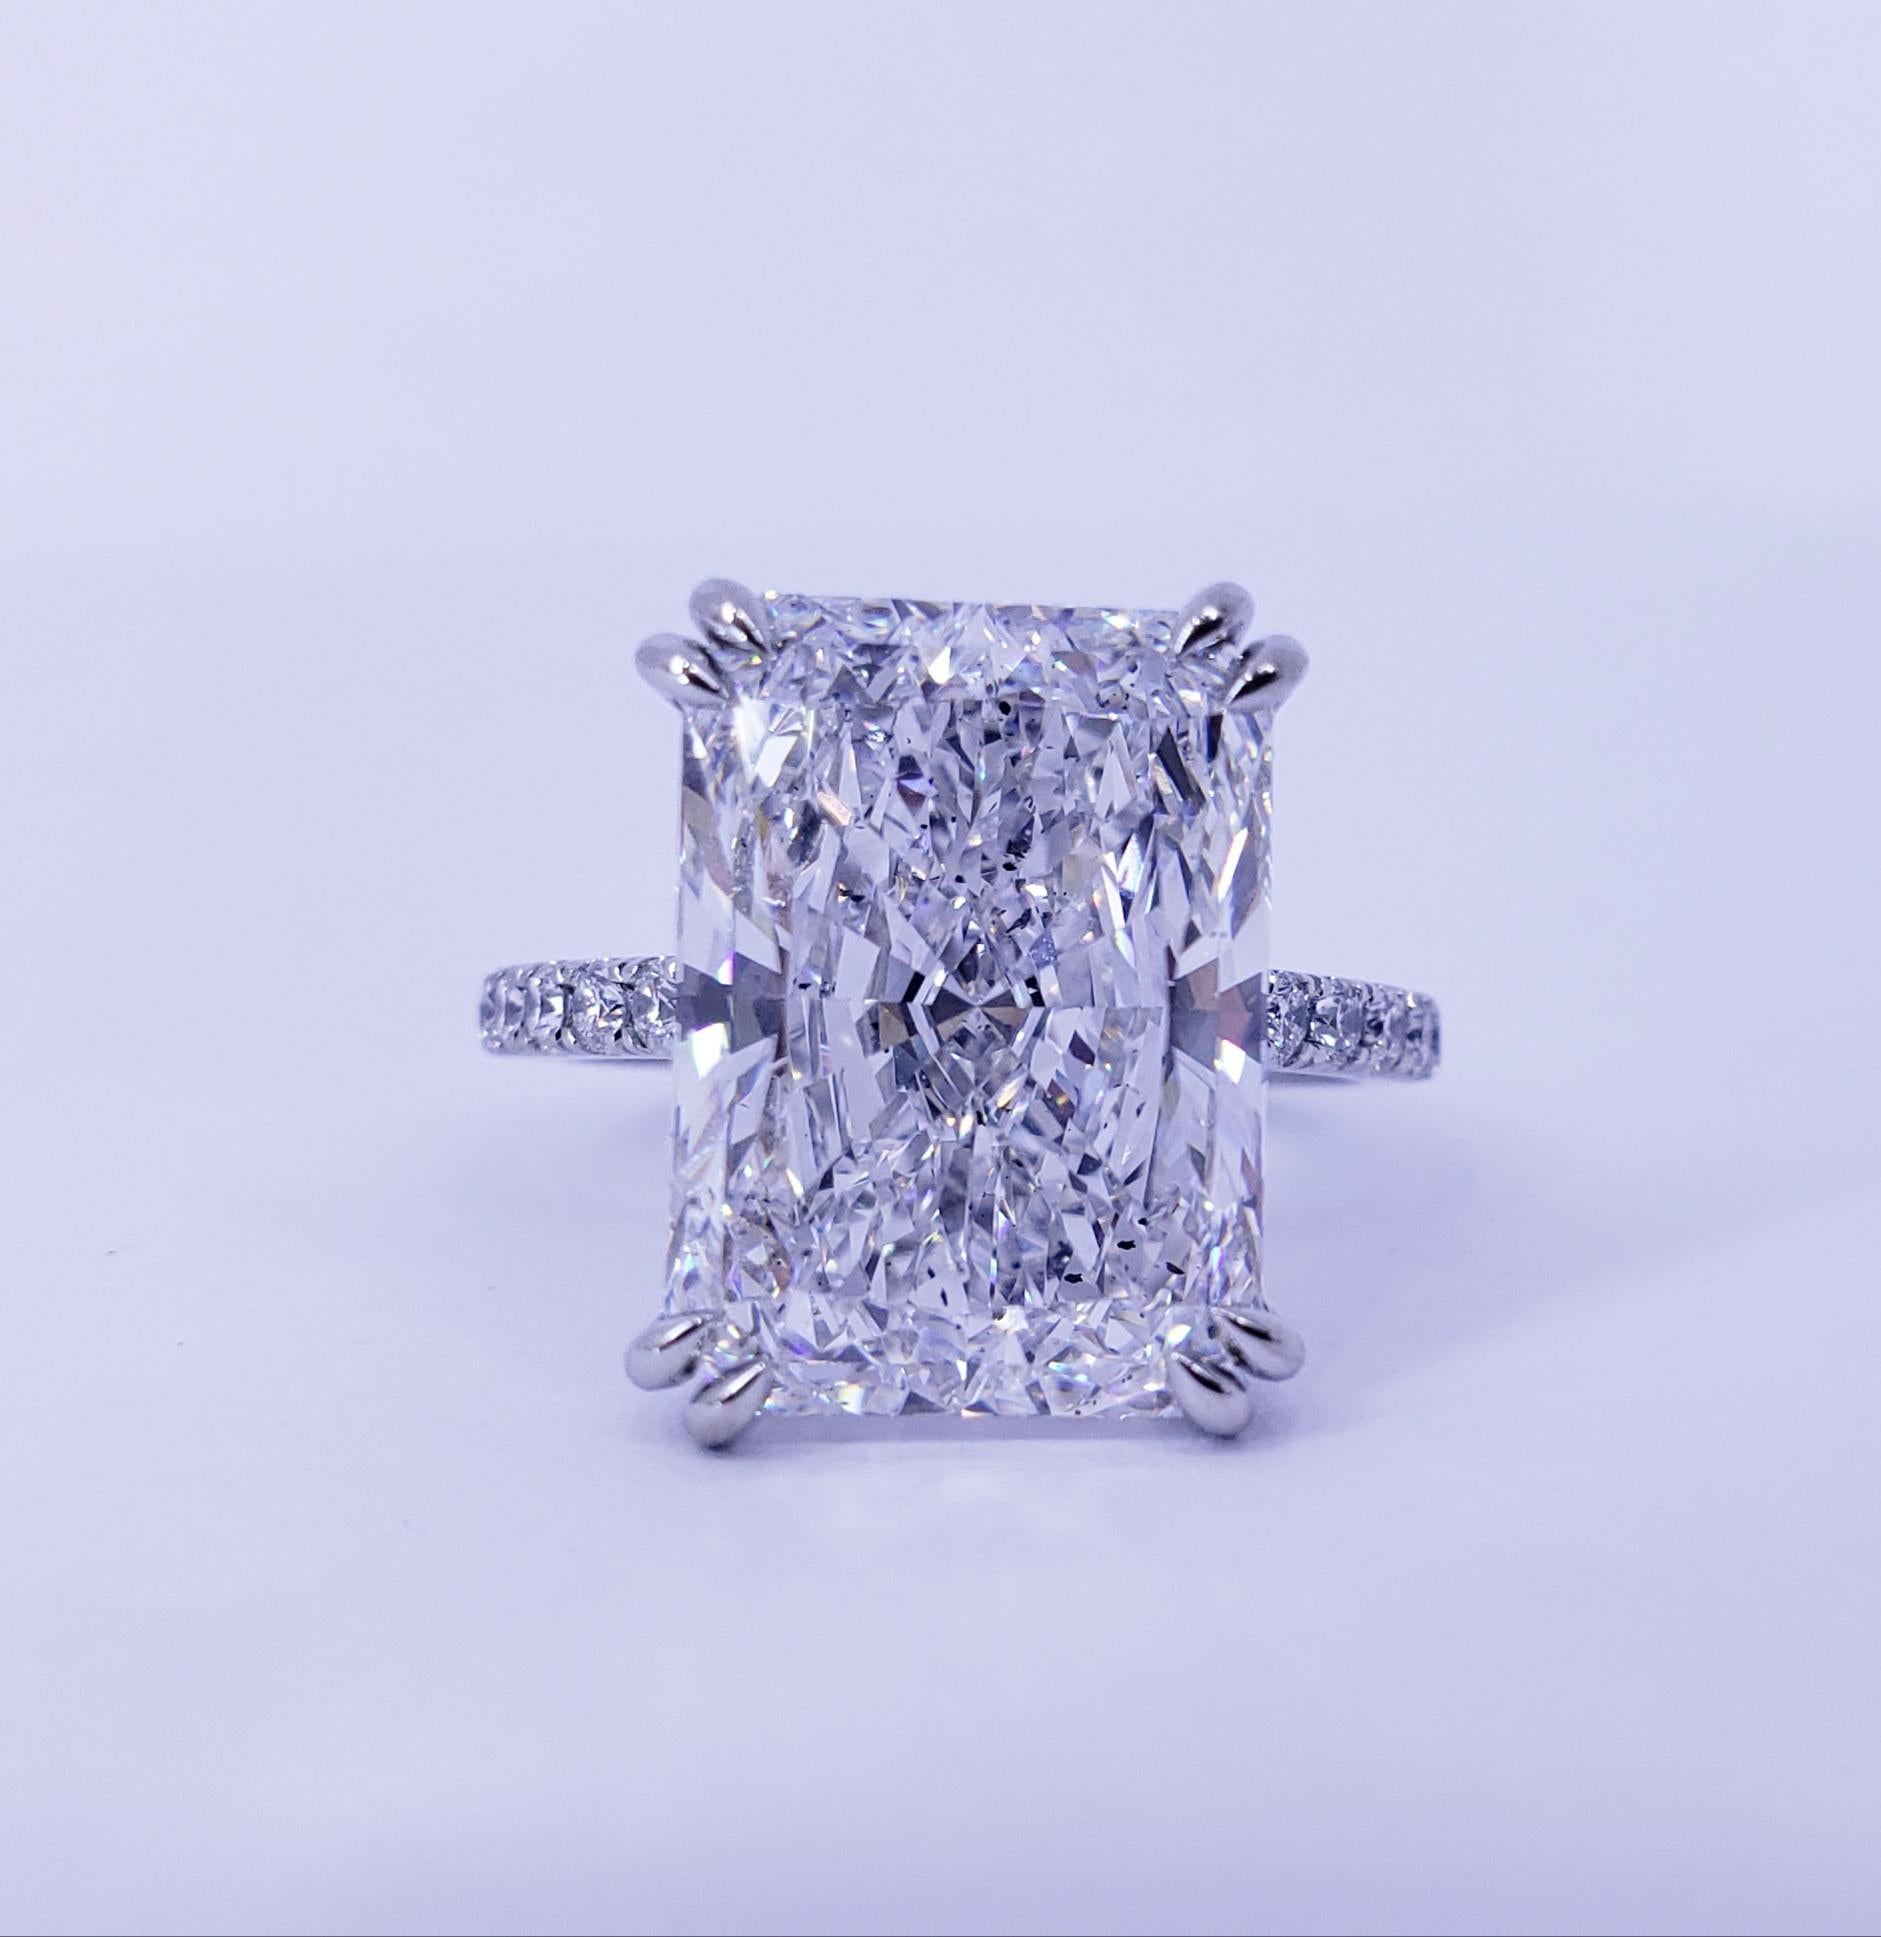 Rosenberg Diamonds & Co. 10.19 carat Radiant shape D color SI2 clarity is accompanied by a GIA certificate. This breathtaking Radiant is full of brilliance and an exceptional SI2 and it is set in a handmade platinum setting and continues its